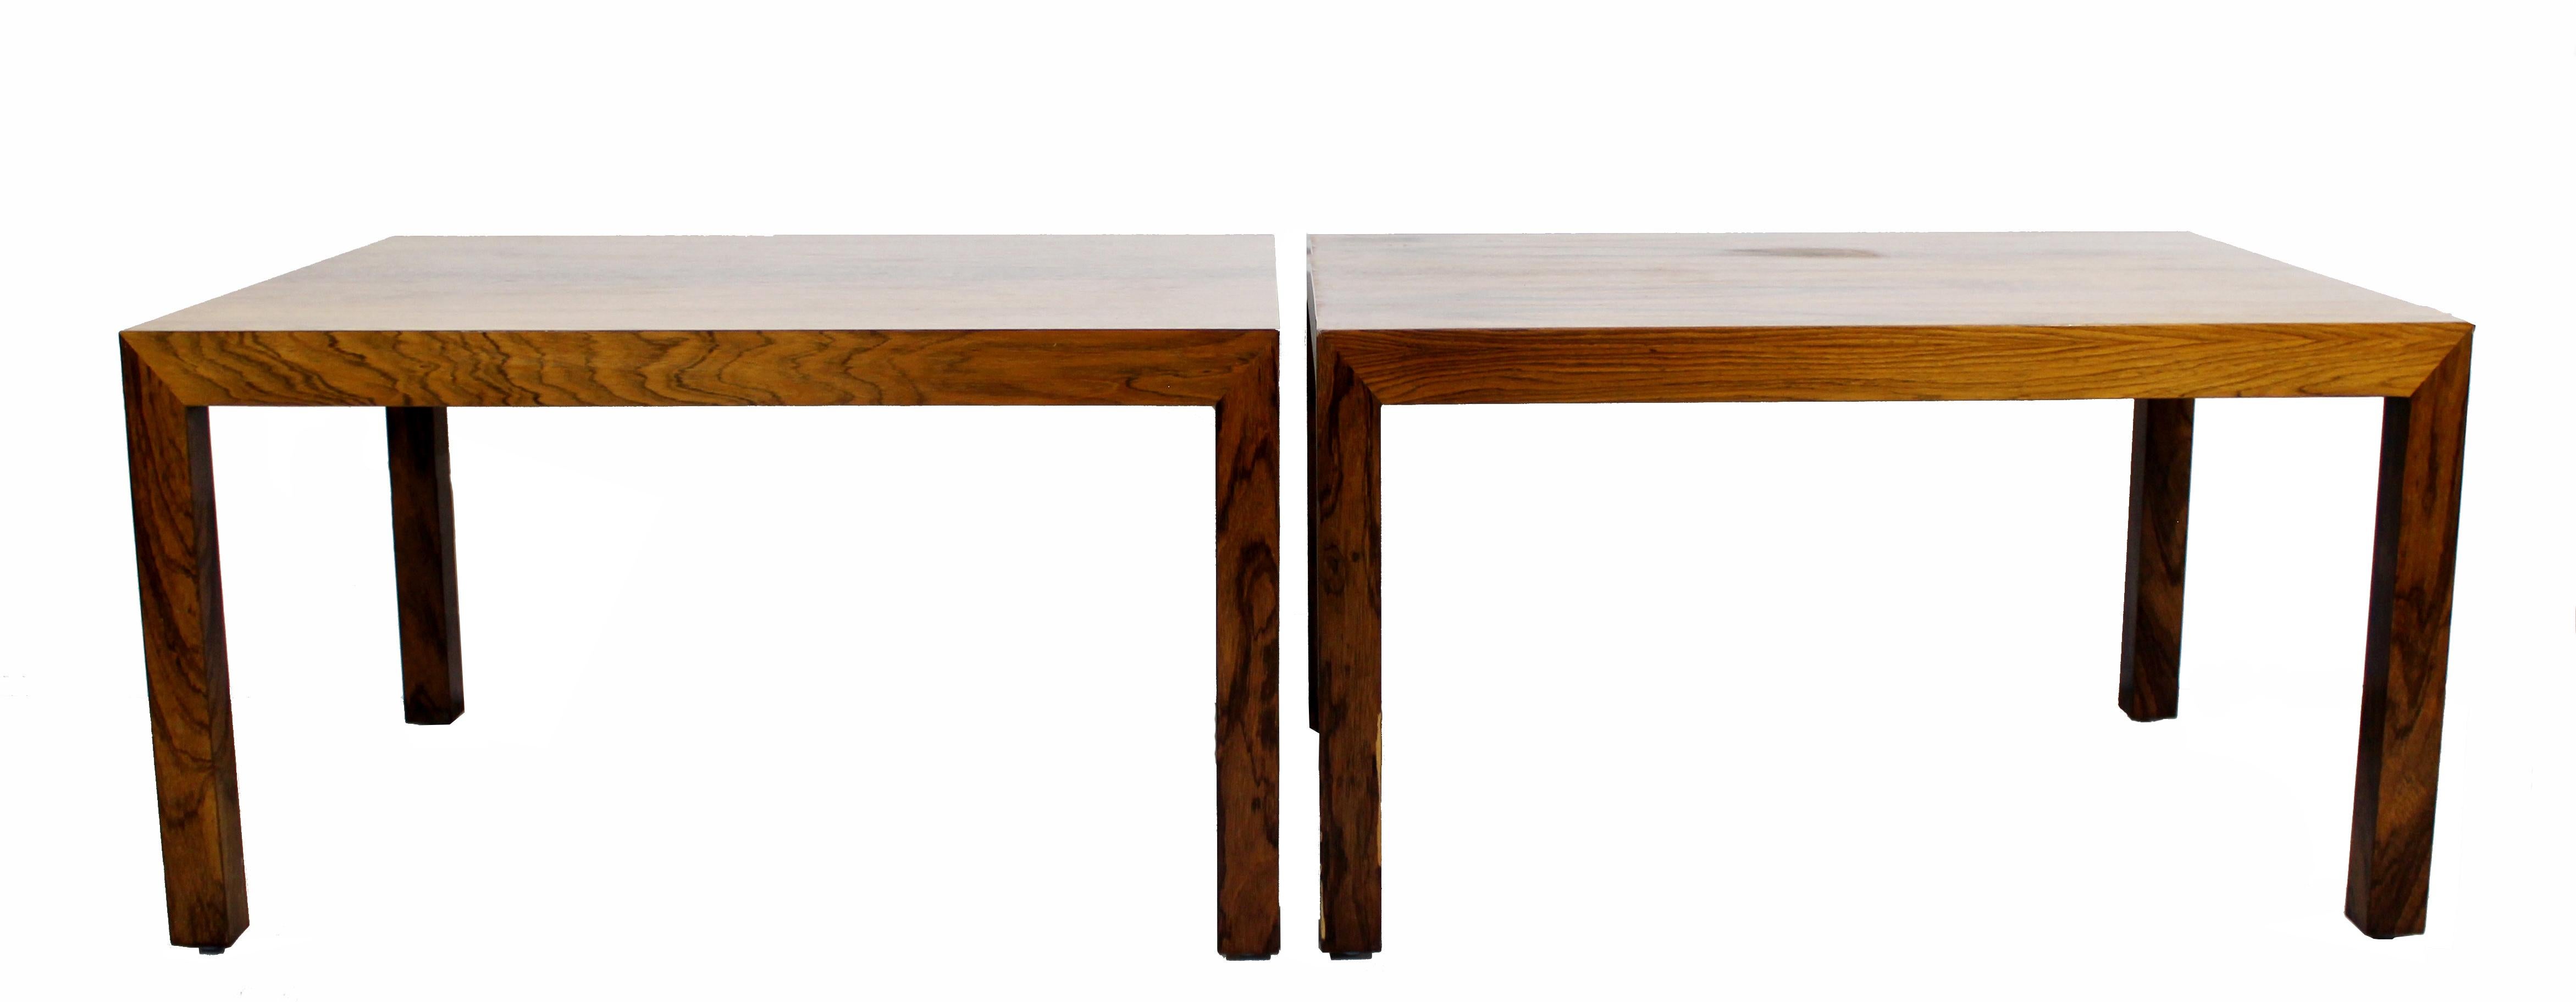 Danish Mid-Century Modern Parsons Pair of Rosewood Side End Tables, Denmark, 1960s